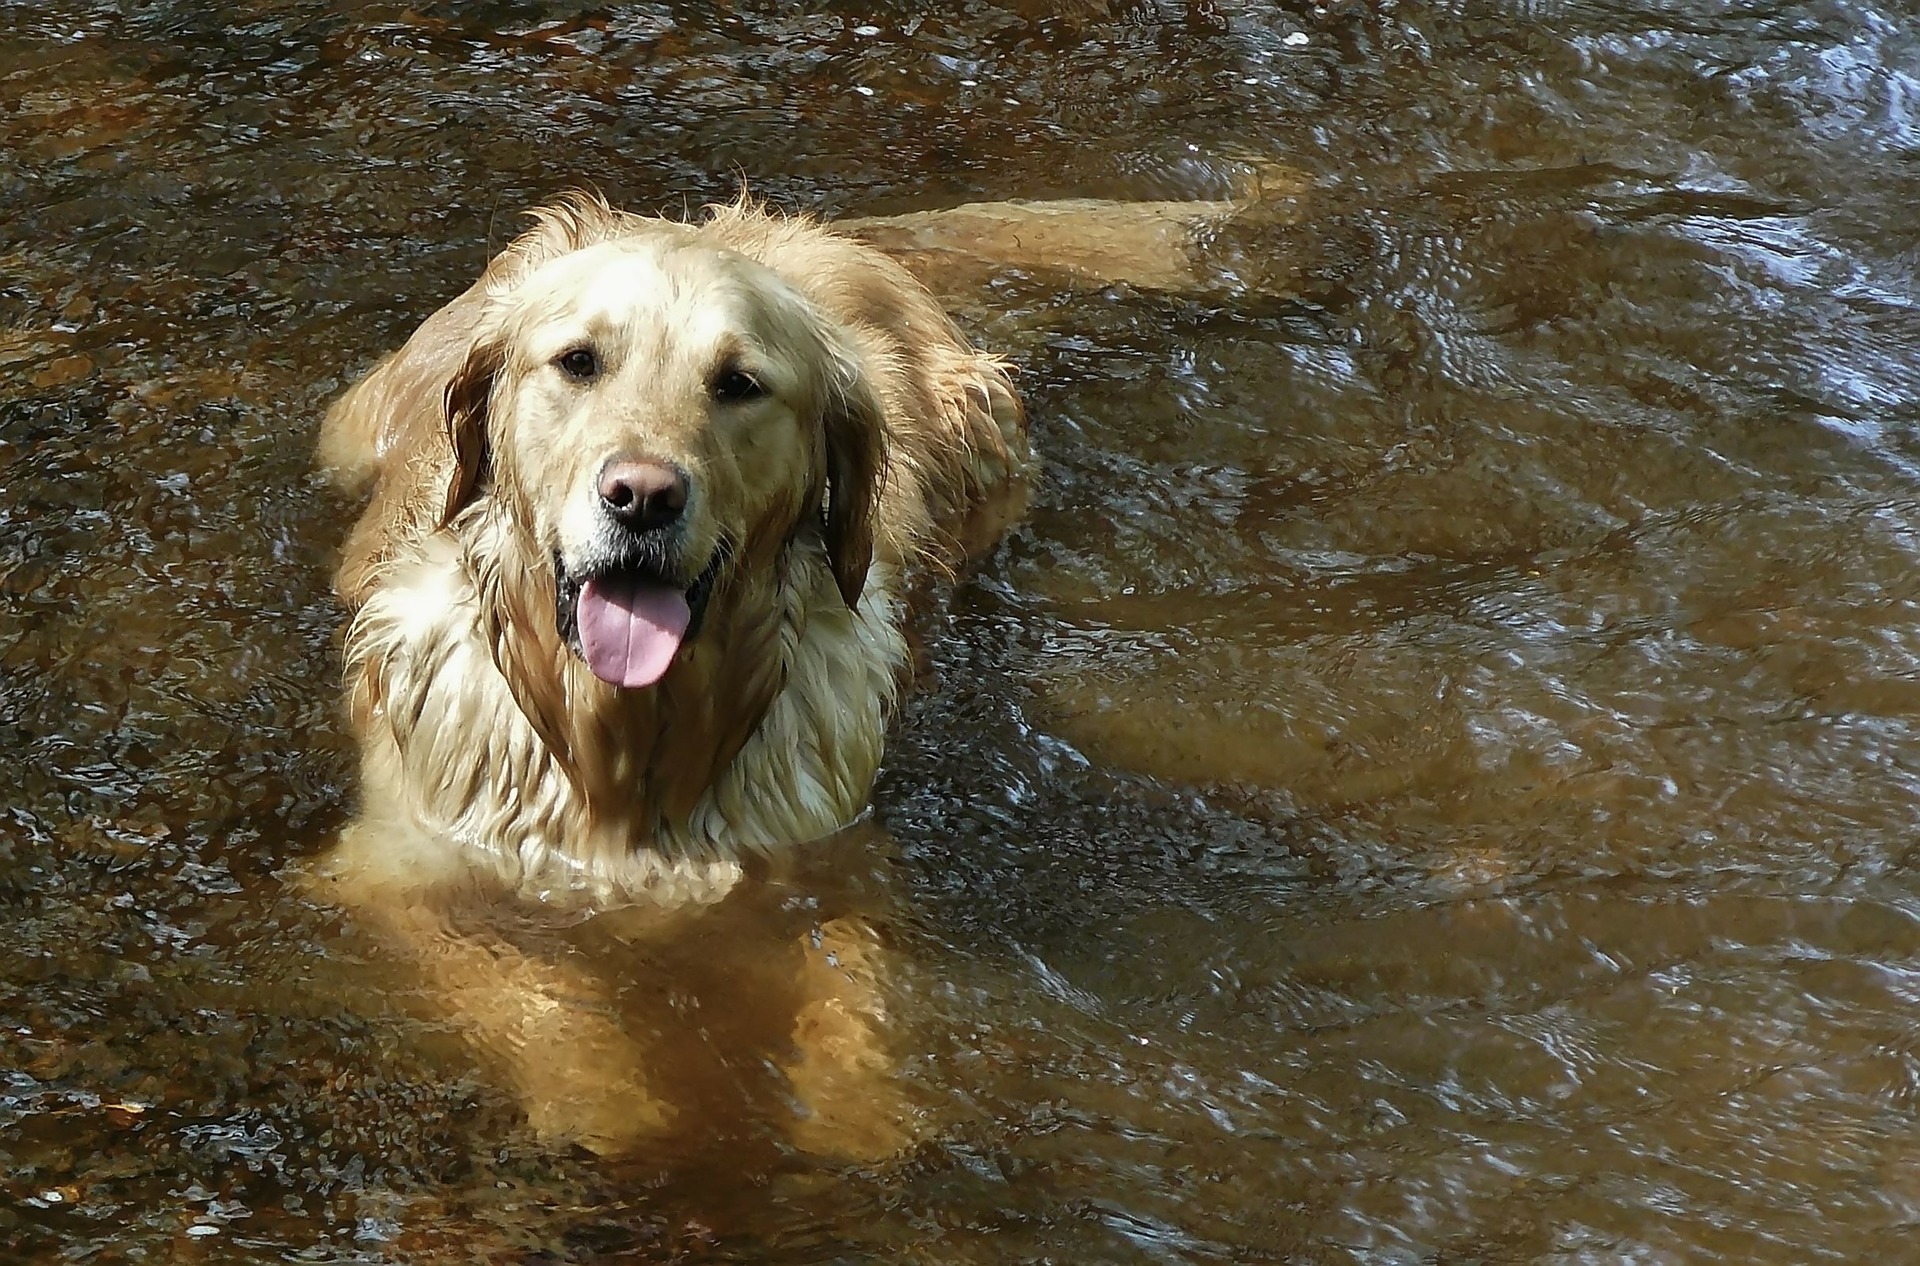 Wet dogs can cause hot spots